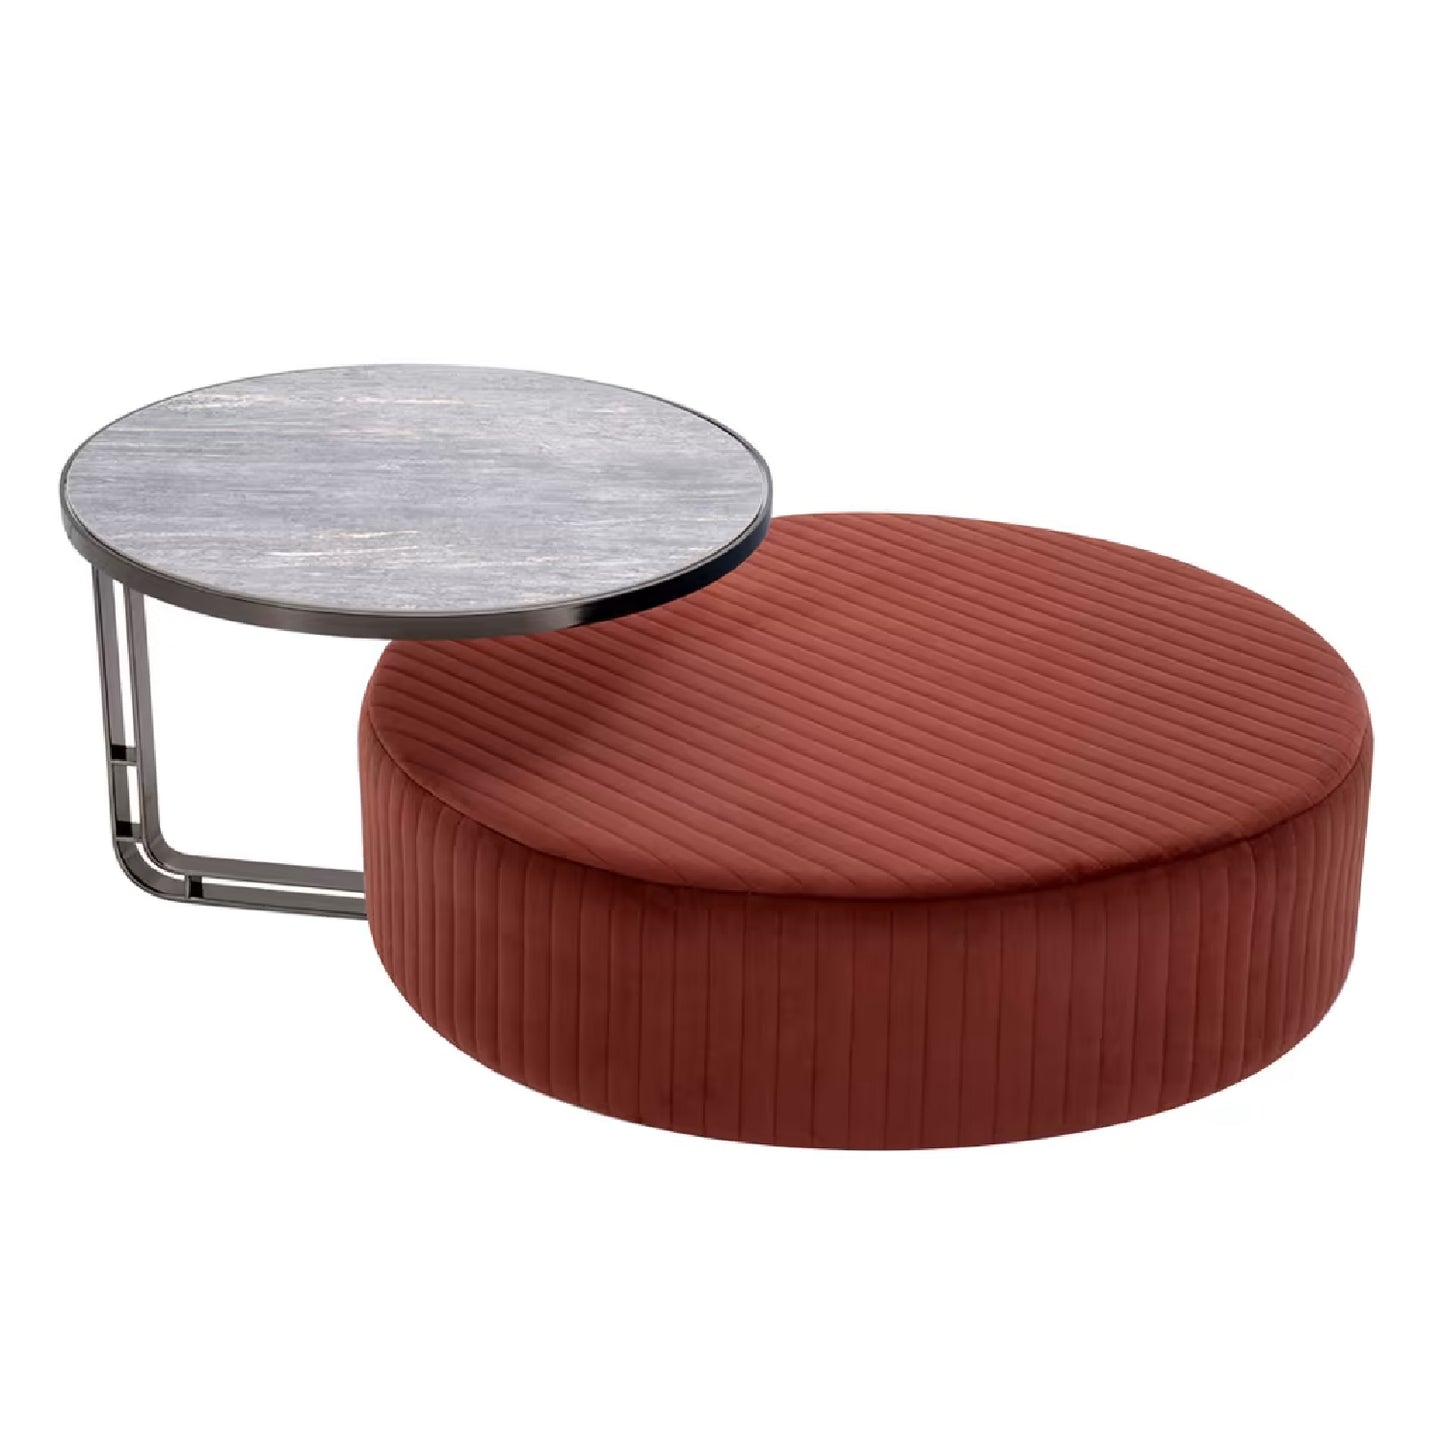 Febe Set of Burgundy Pouf and Small Table by Domingo Salotti